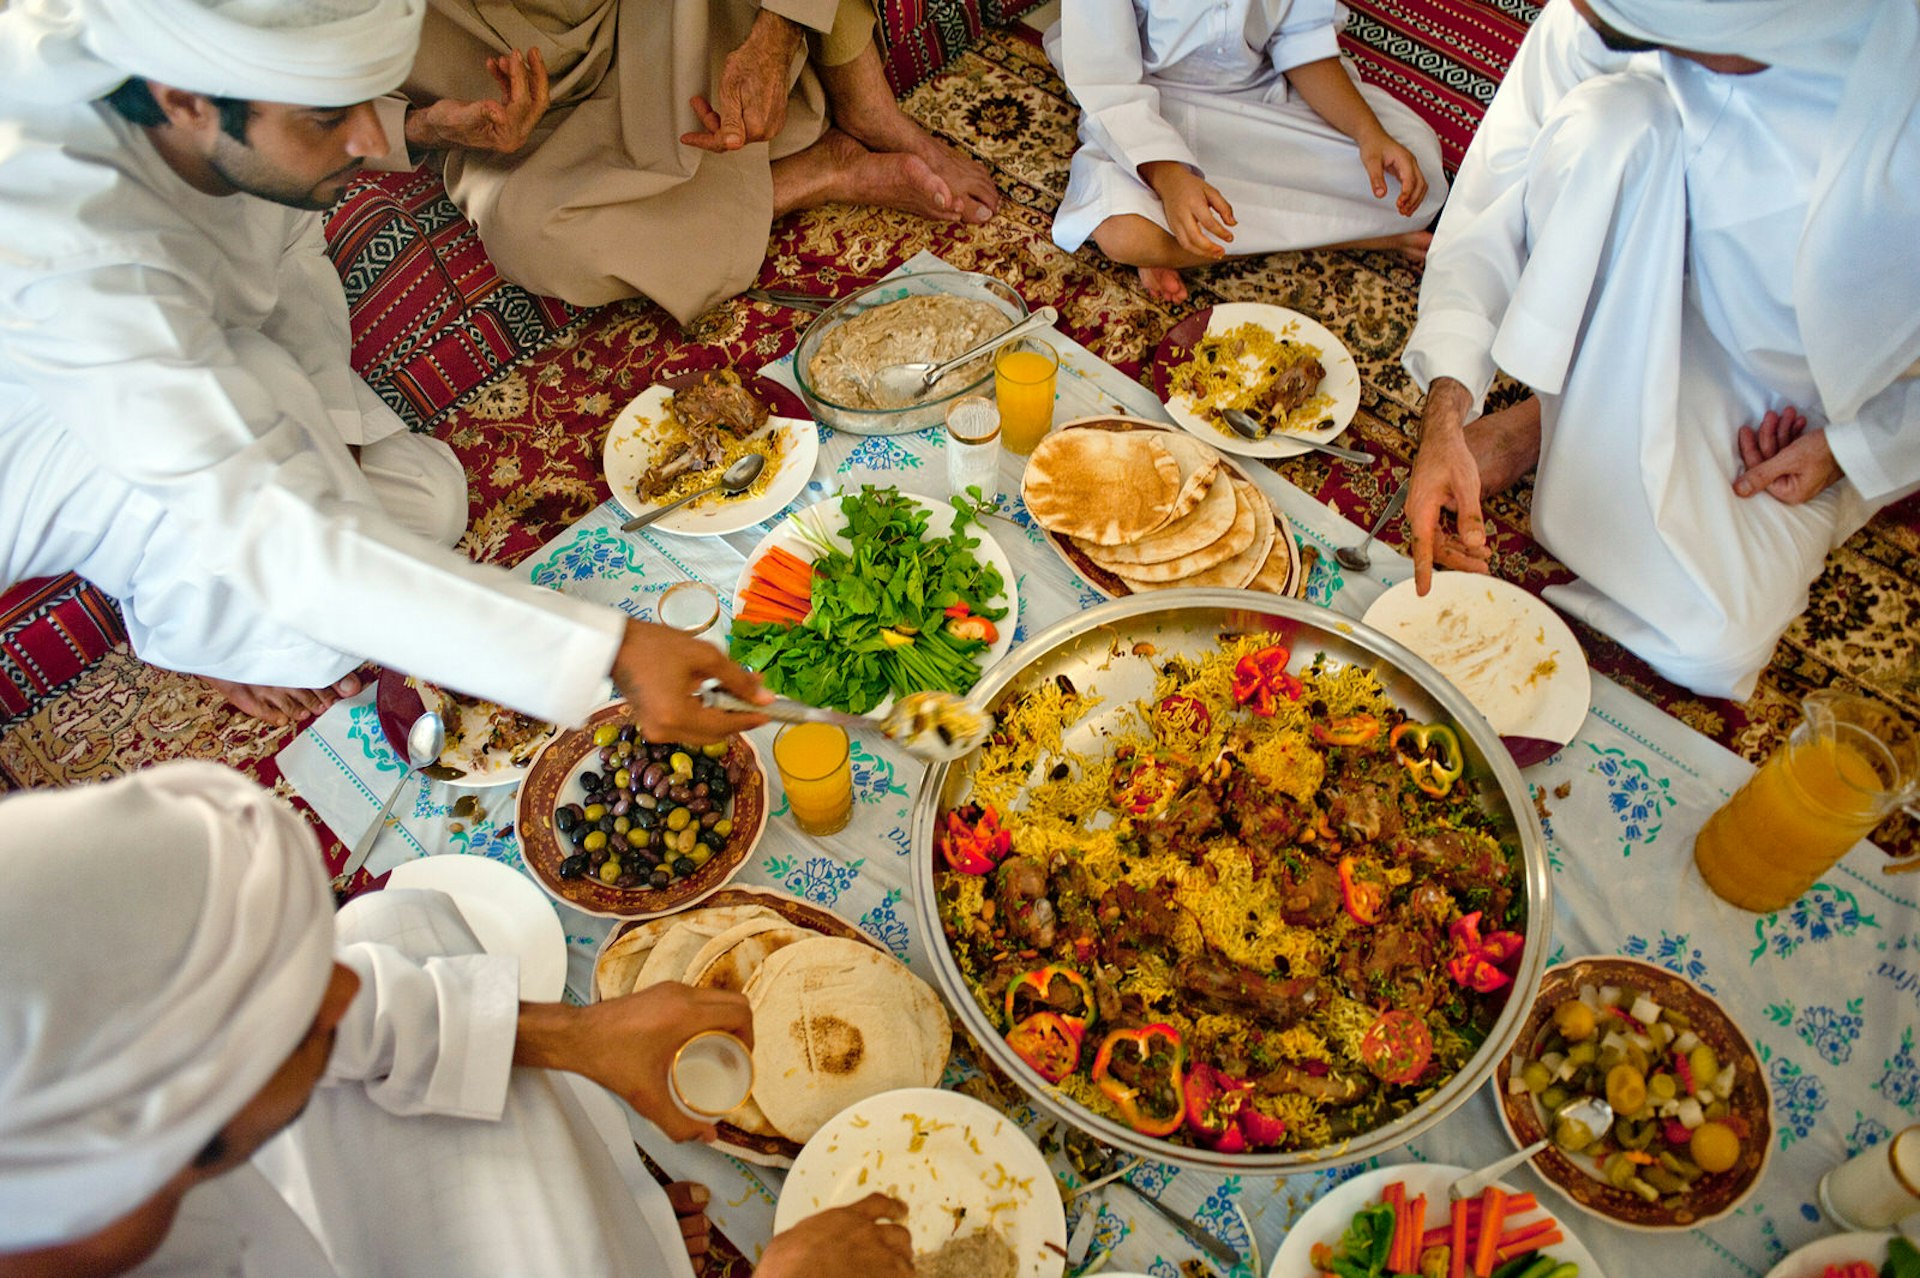 A family sit on the floor for food in Dubai © Rich-Joseph Facun / Getty Images